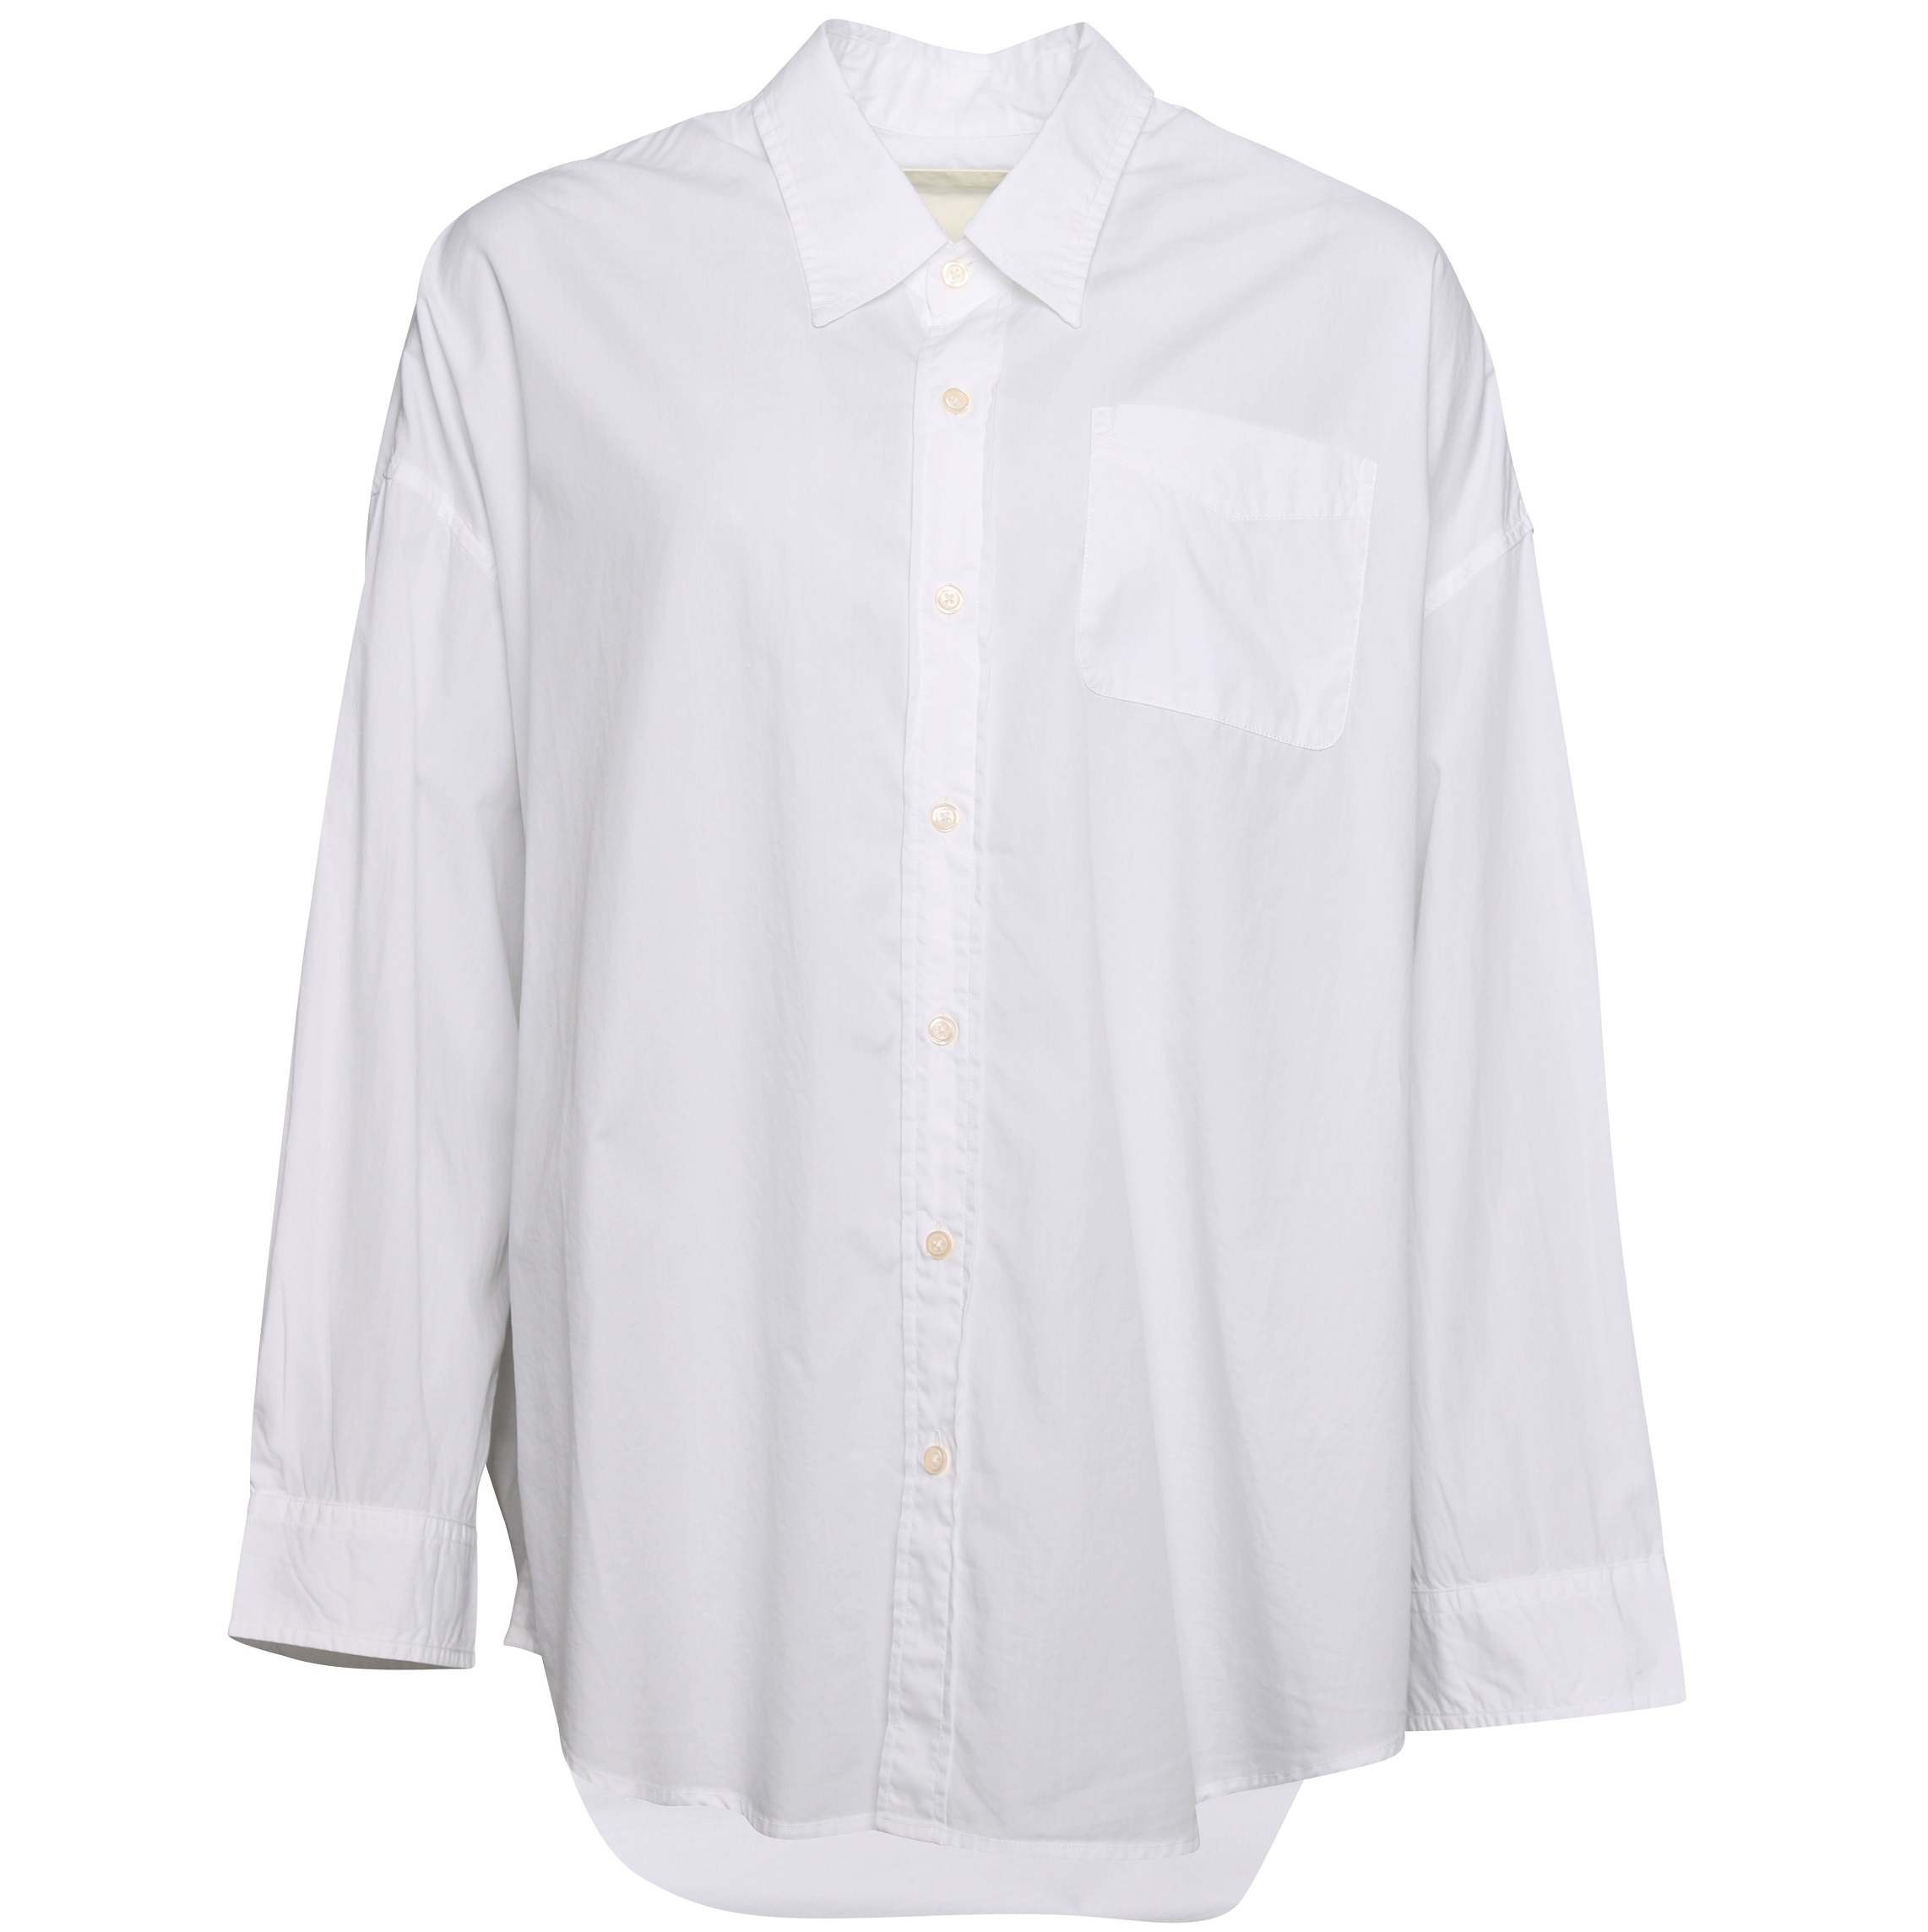 R13 Drop Neck Oxford Shirt in White M